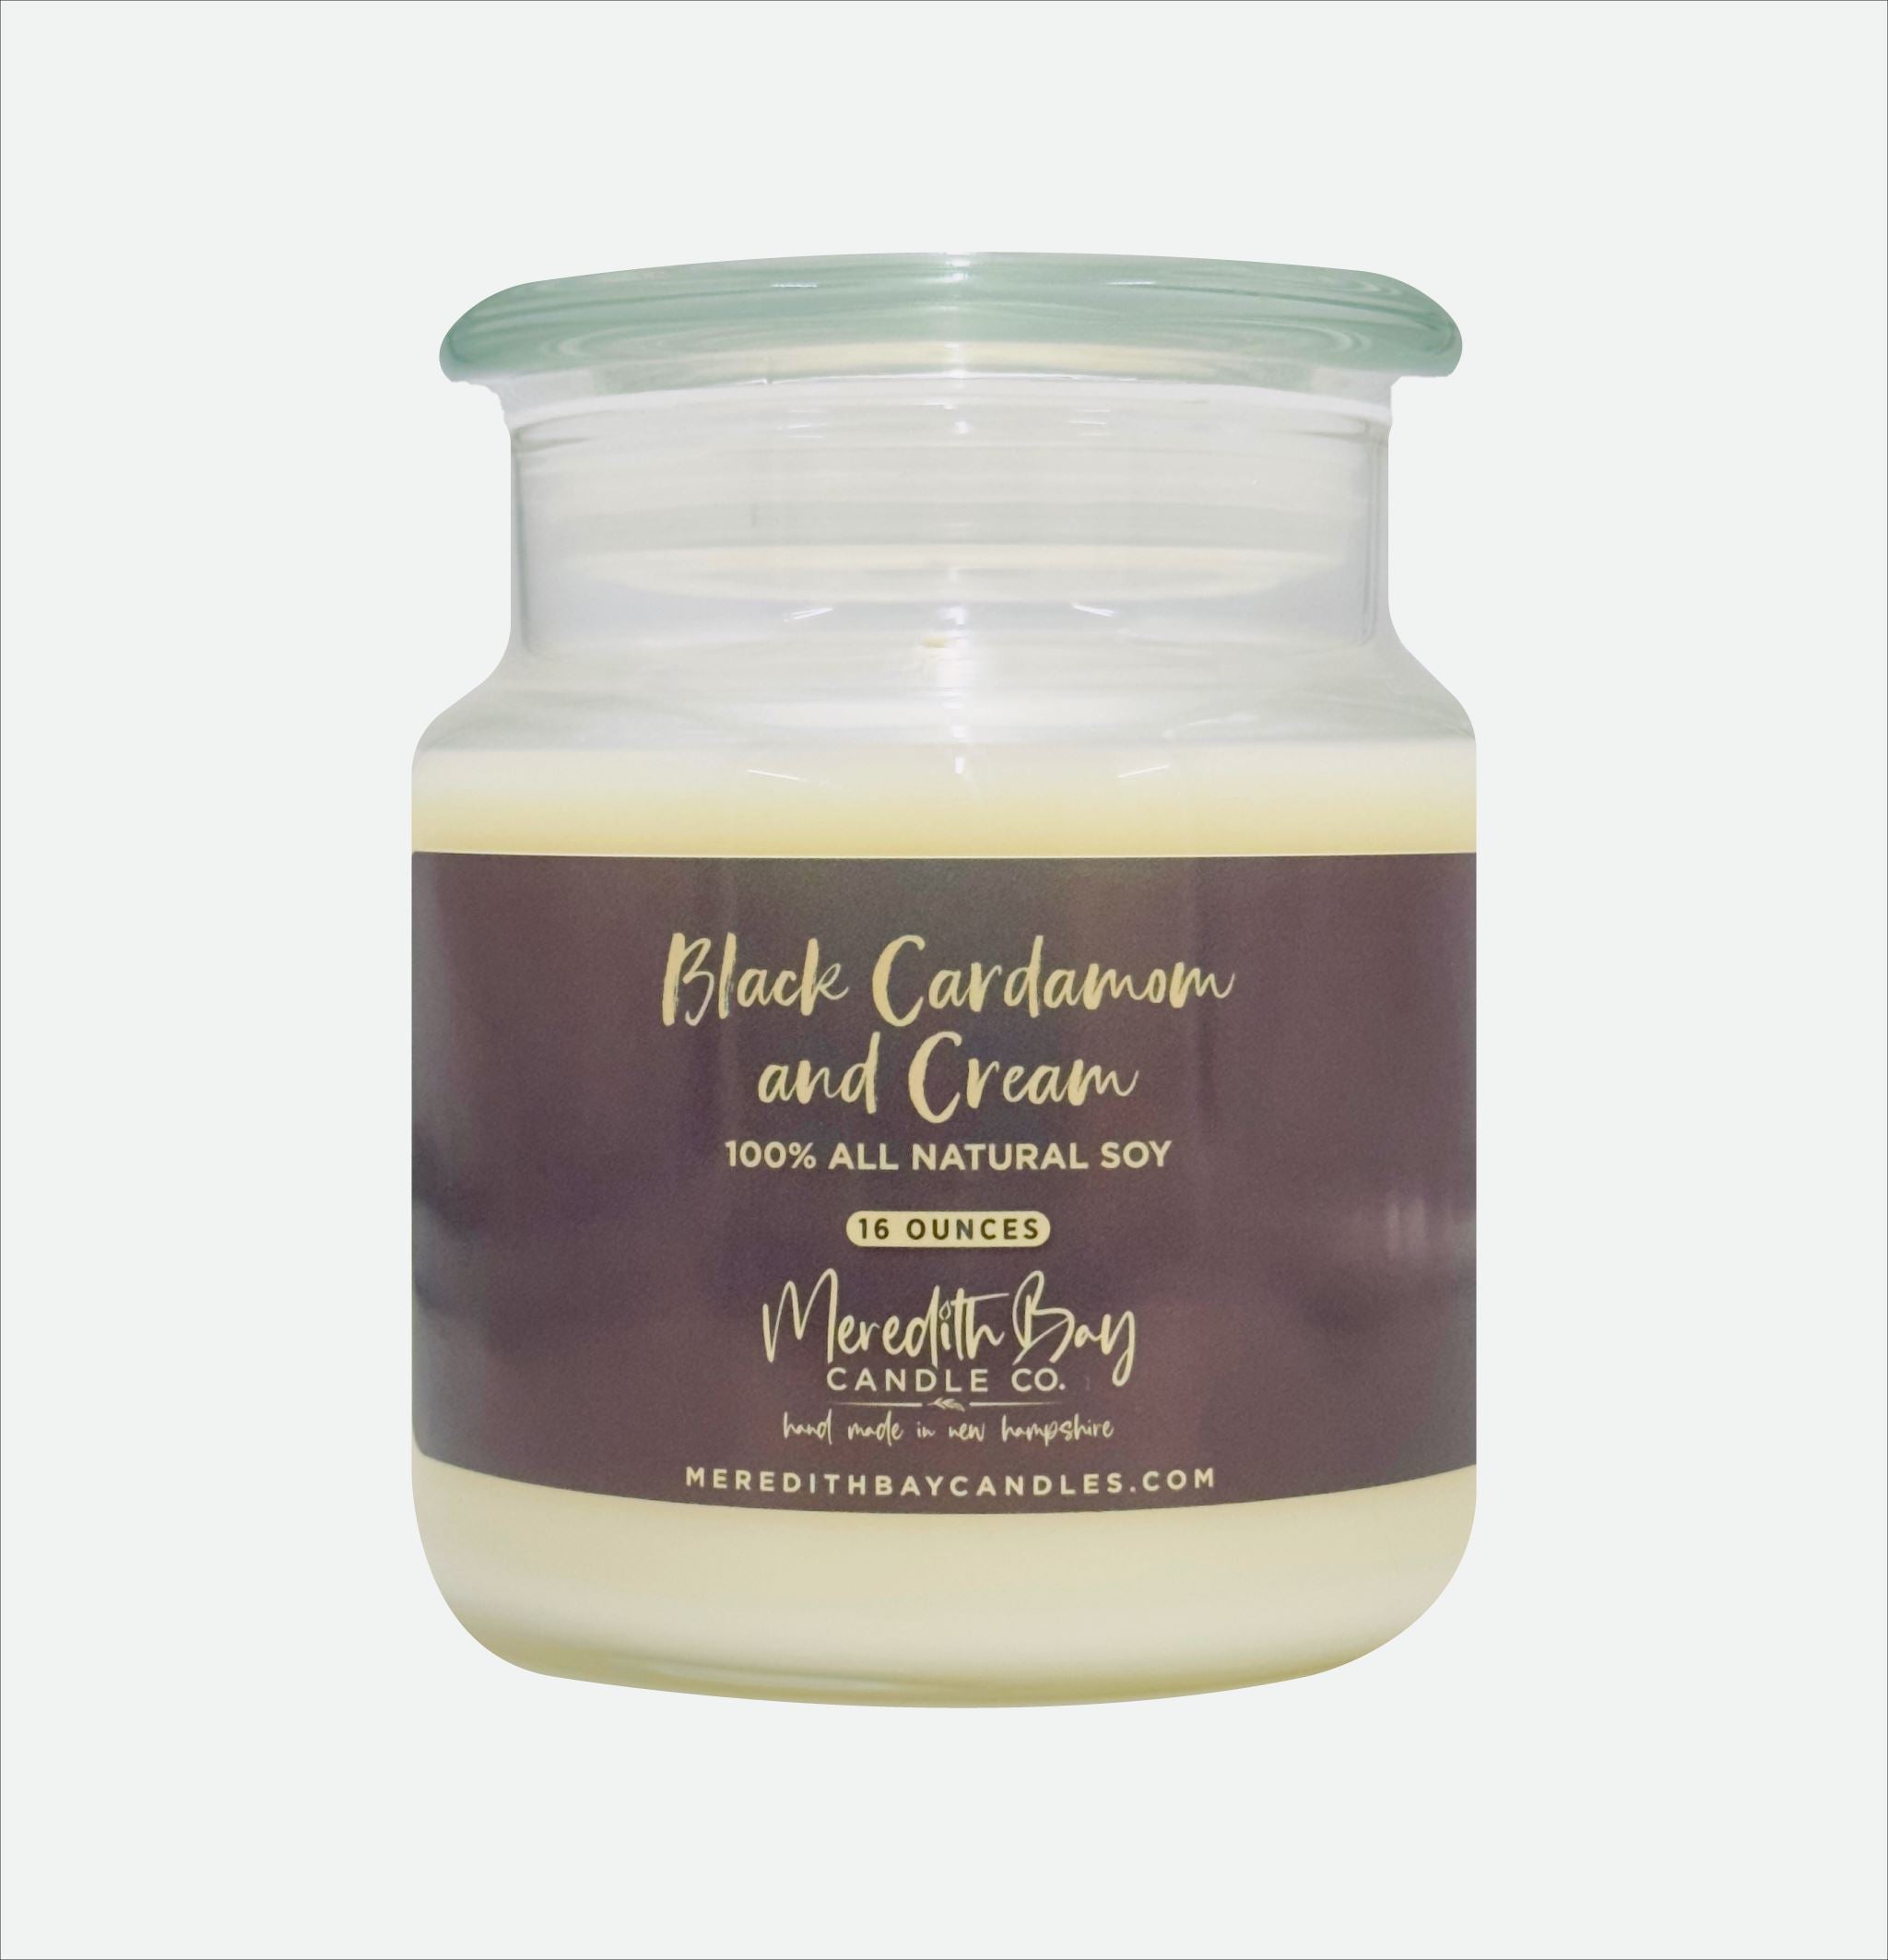 Black Cardamom & Cream Soy Candle Soy Candle Meredith Bay Candle Co 16.0 Oz 